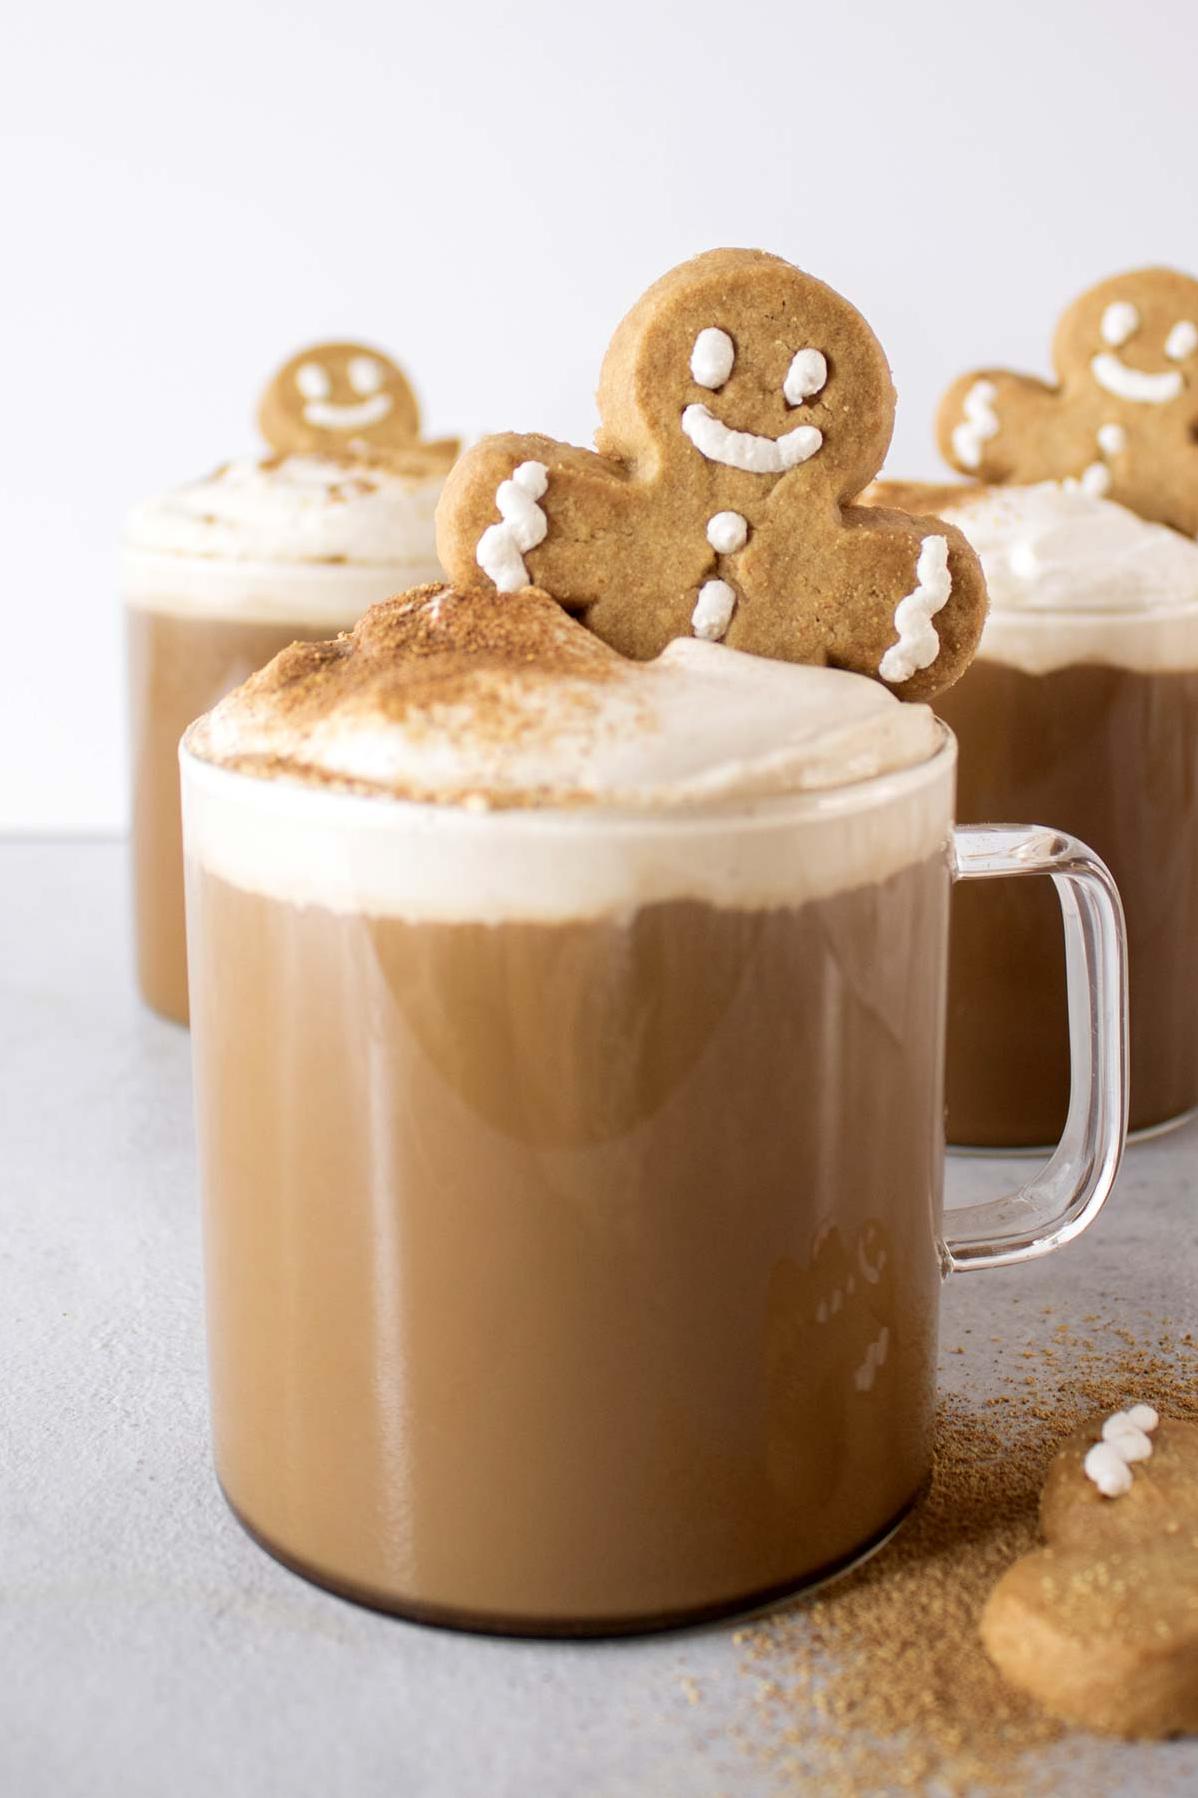  Wake up and smell the gingerbread latte!